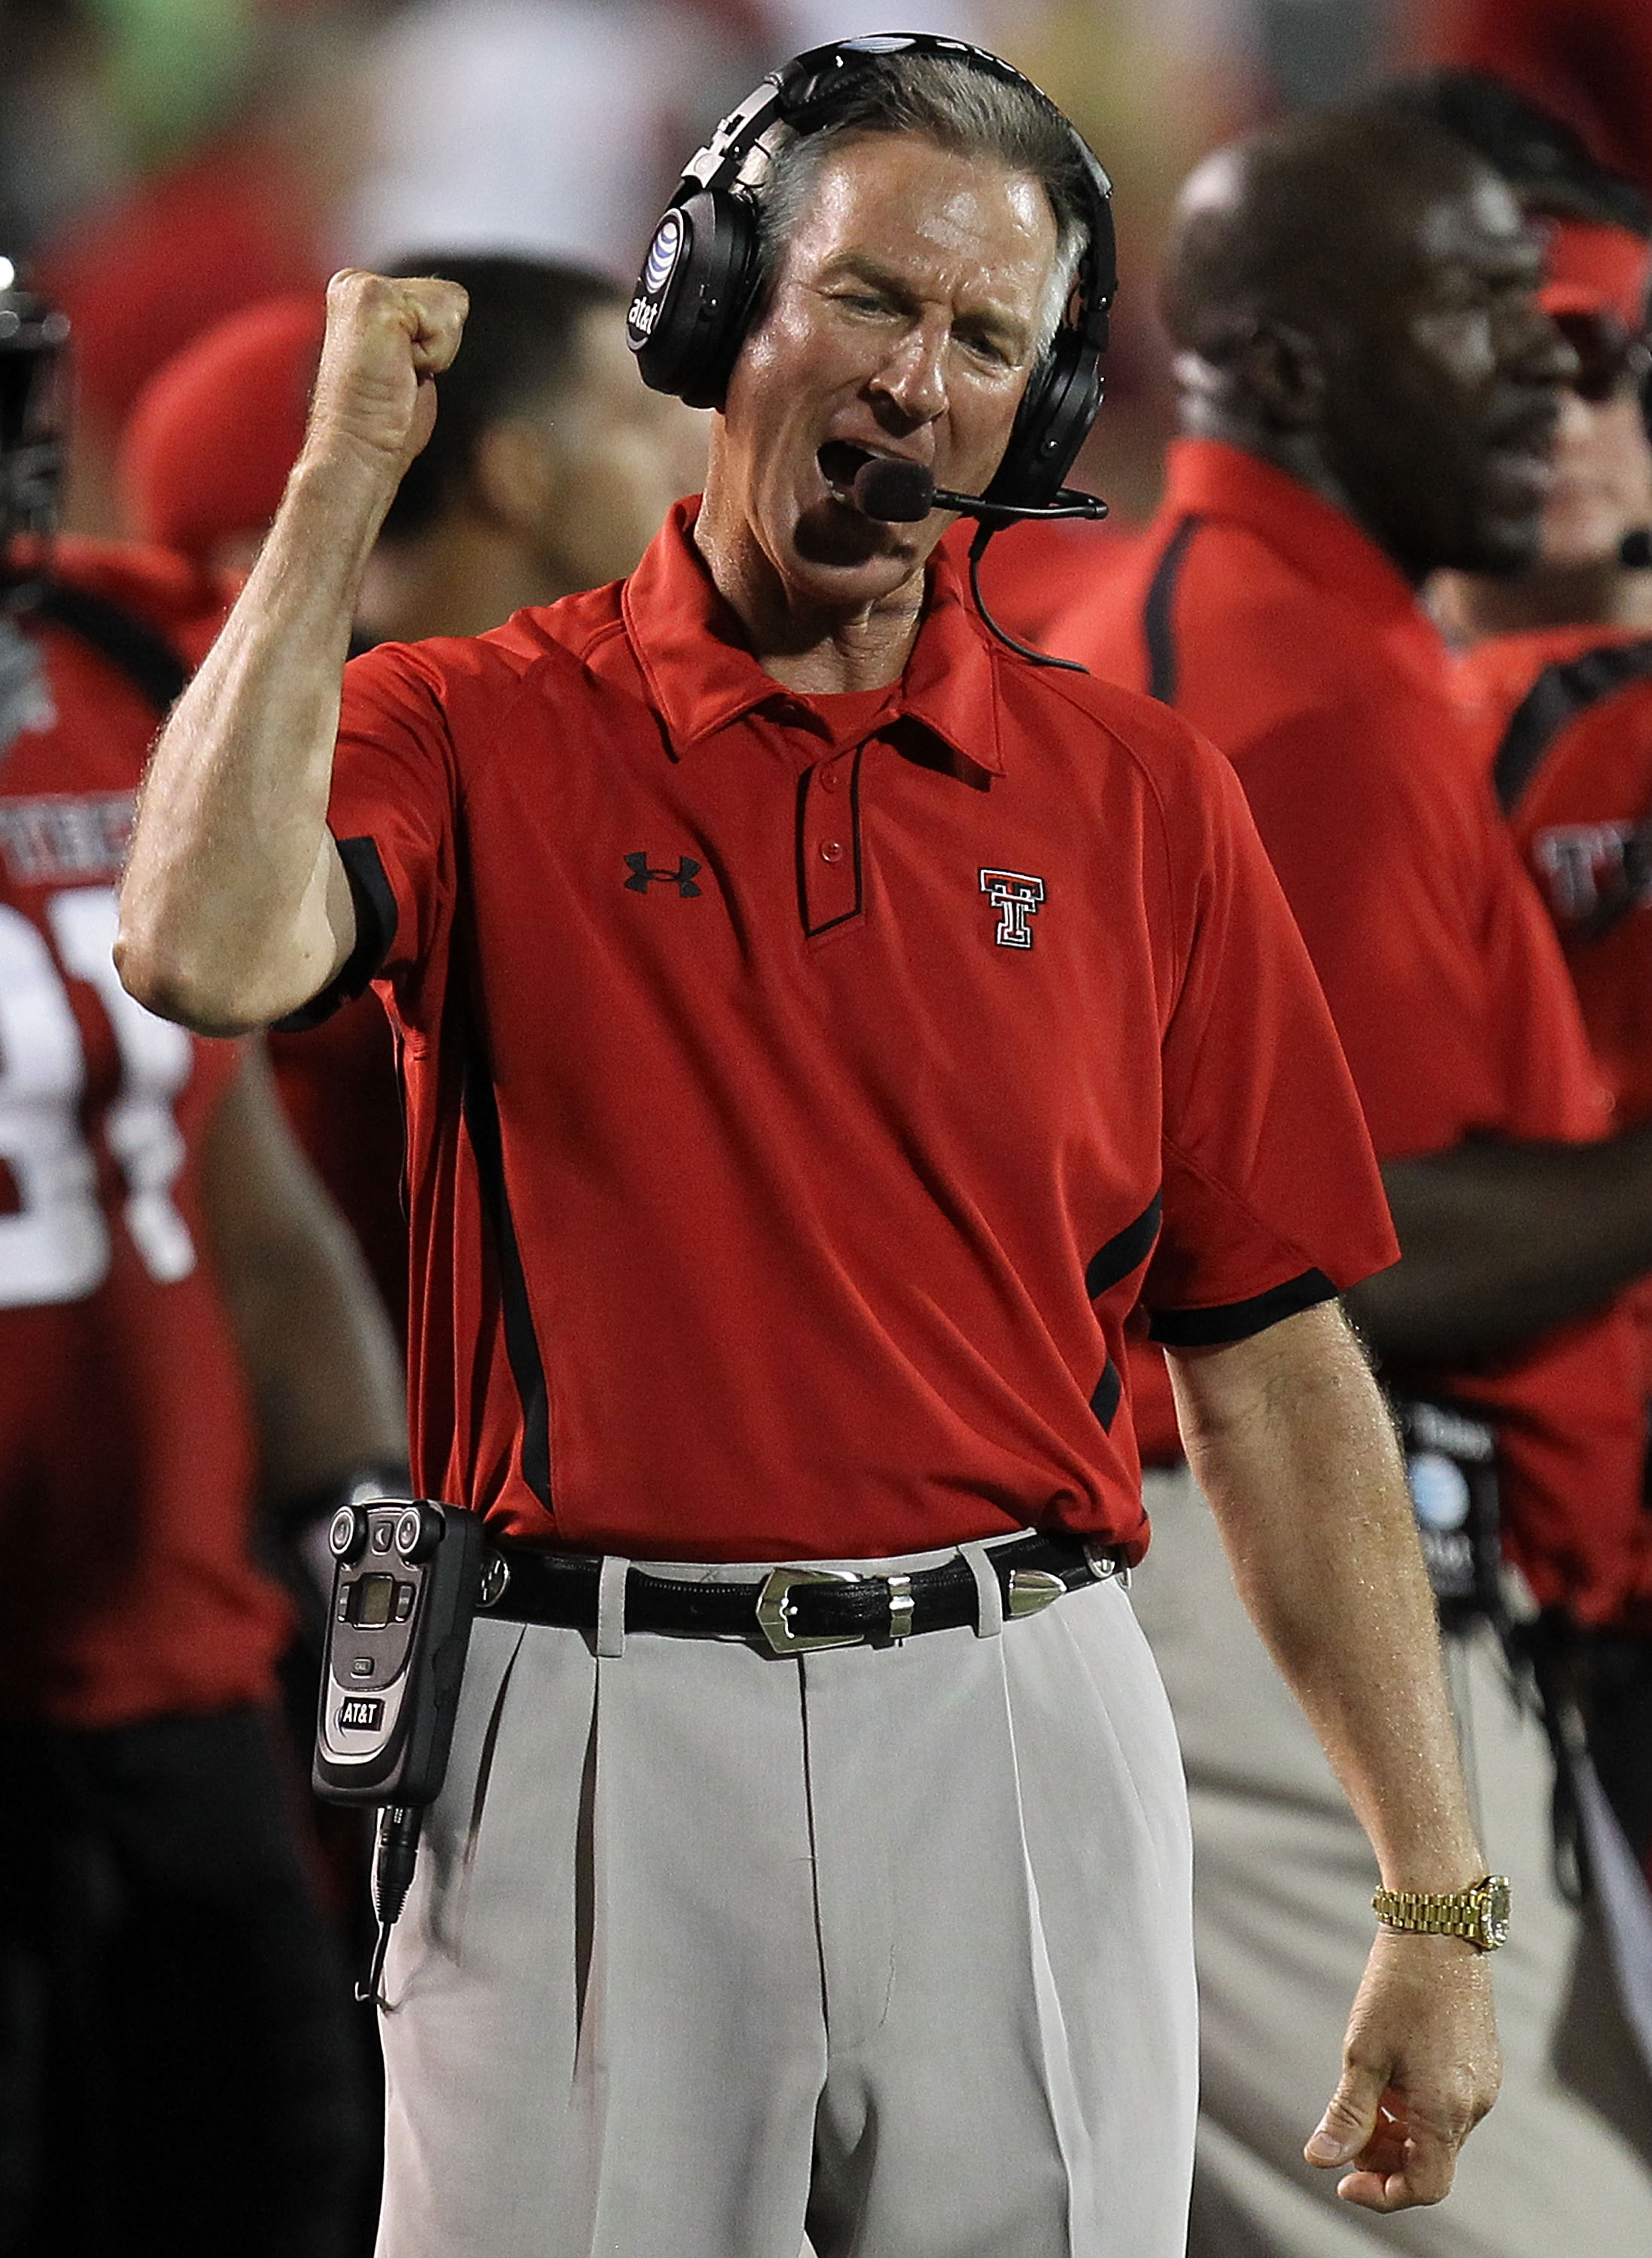 LUBBOCK, TX - SEPTEMBER 18:  Head coach Tommy Tuberville of the Texas Tech Red Raiders reacts on the sidelines during play against the Texas Longhorns at Jones AT&T Stadium on September 18, 2010 in Lubbock, Texas.  (Photo by Ronald Martinez/Getty Images)